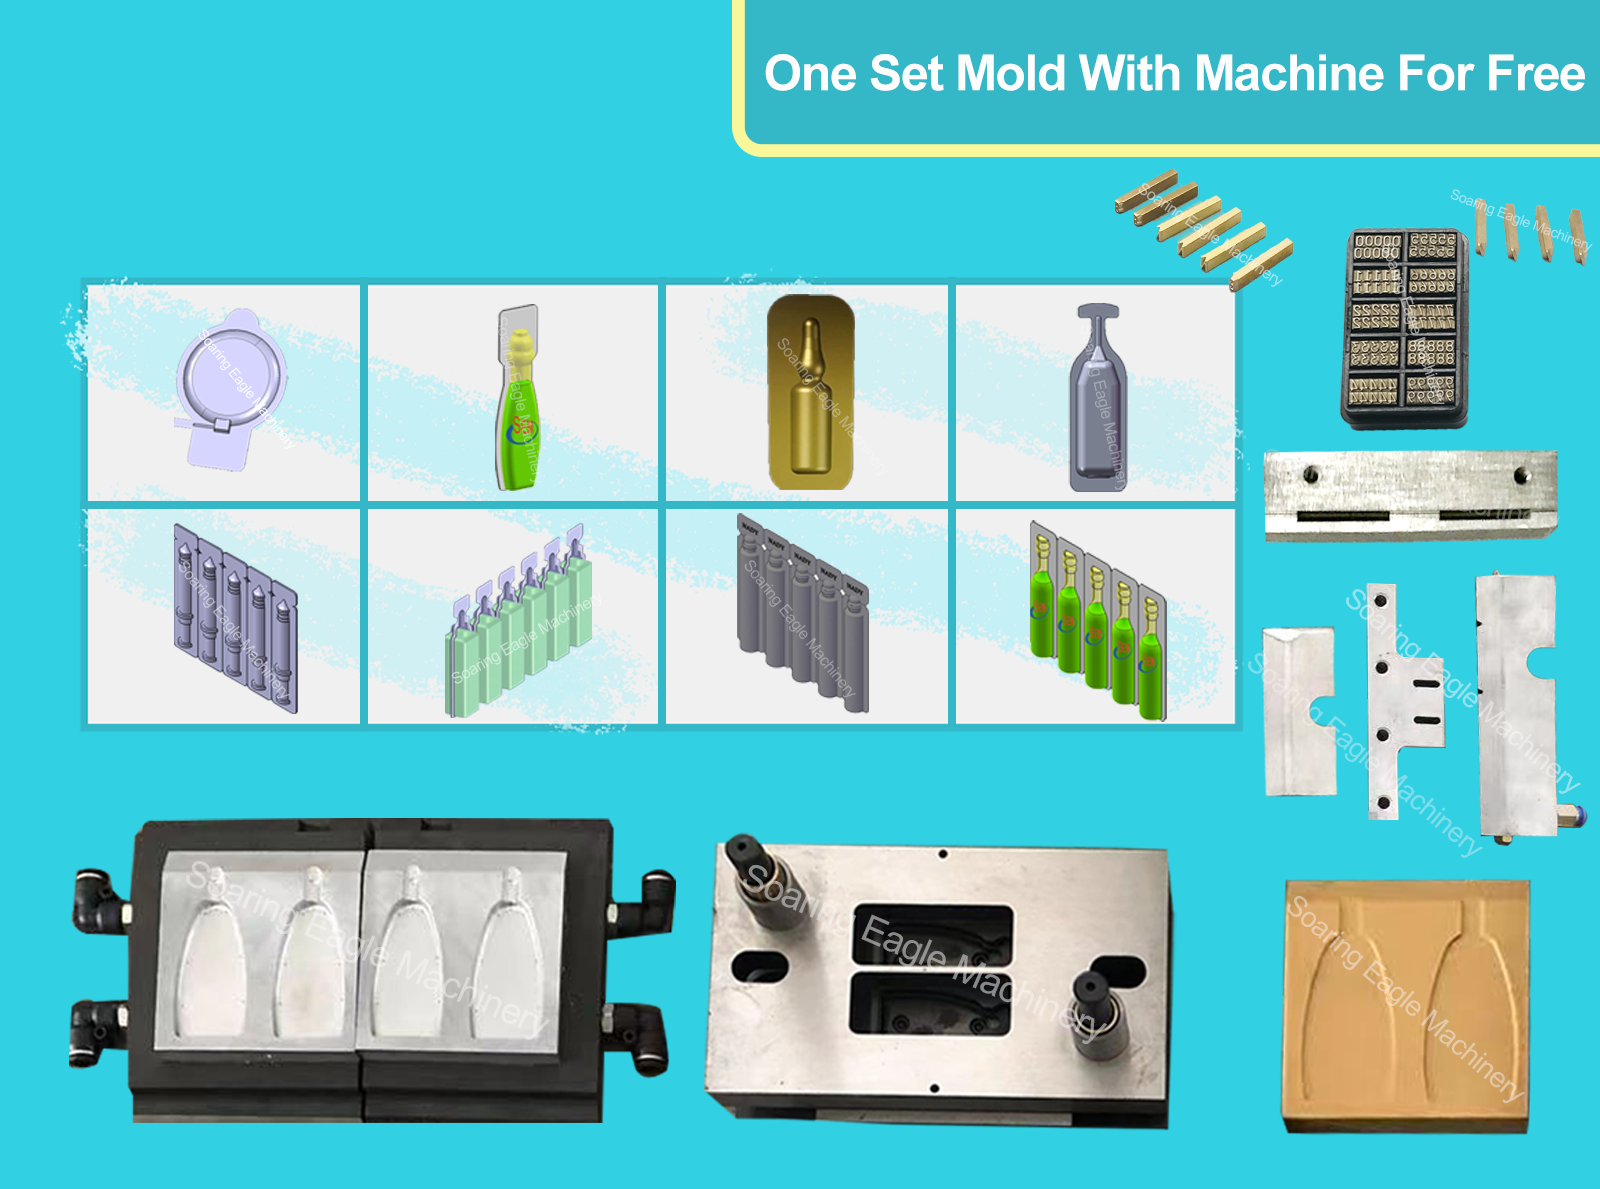 Liquid Honey Automatic Packing Jam Olive Oil Cheese Butter Cream Filling Packaging Machine